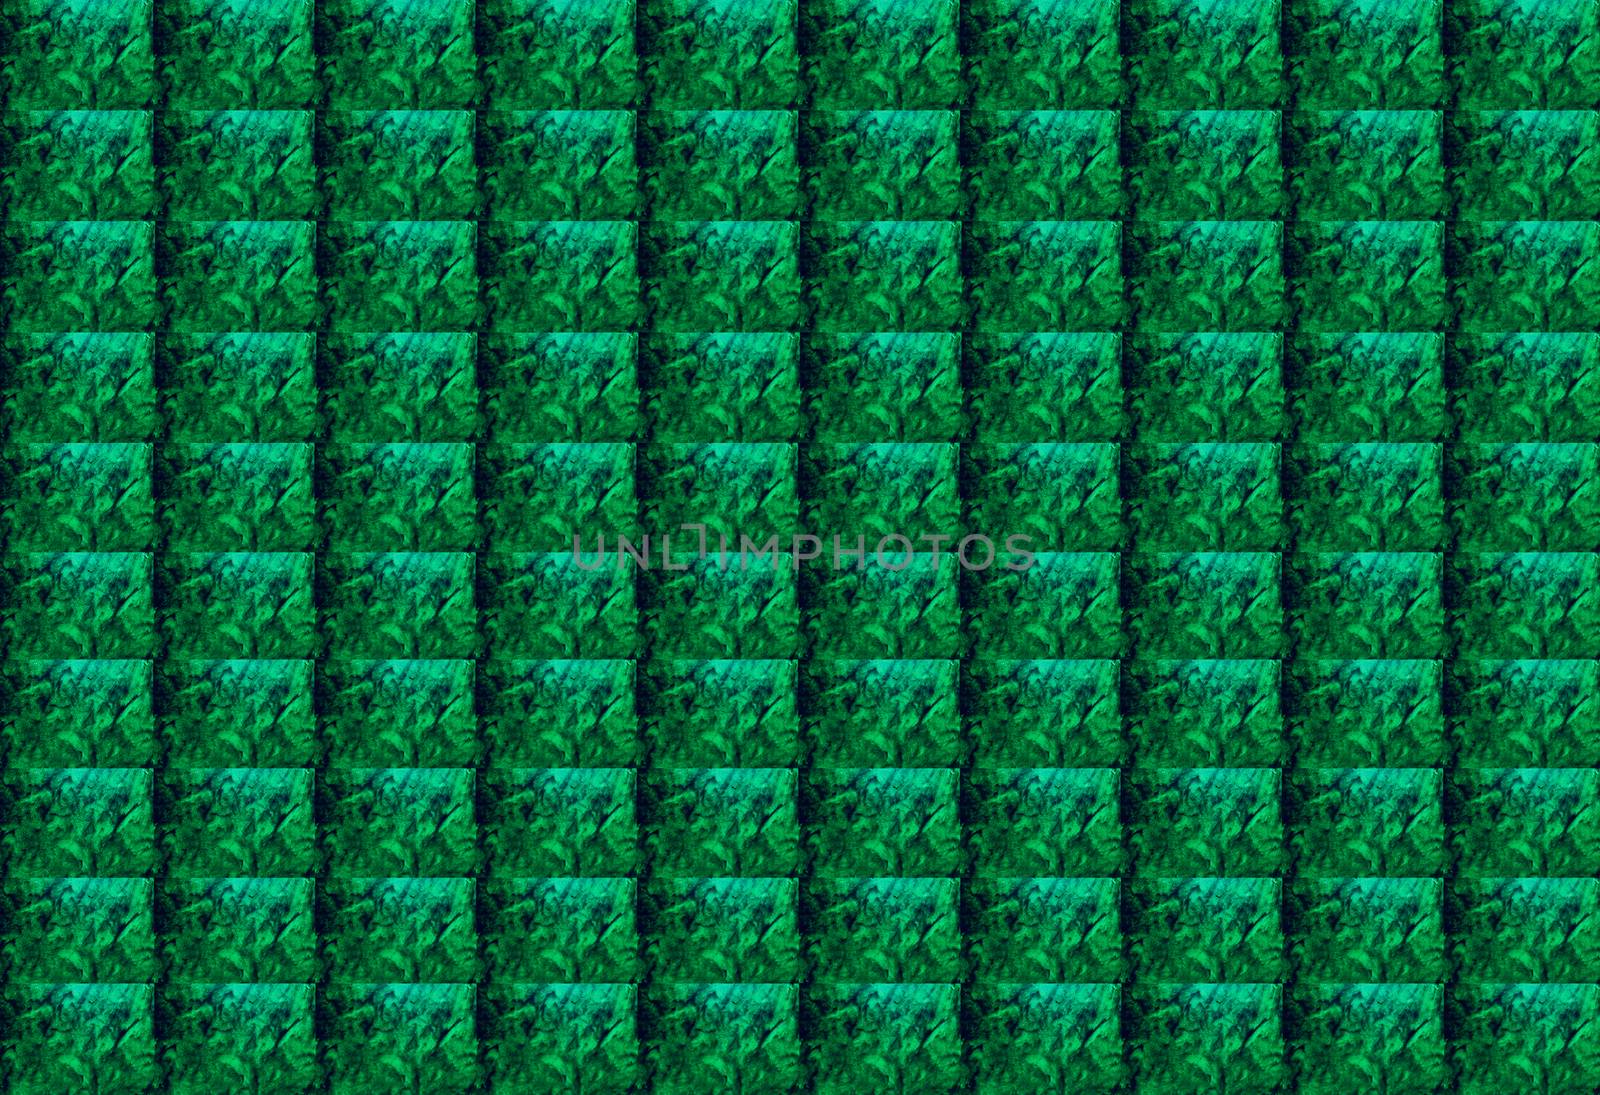 Bright Green Abstract Textured Rectangular Geometric Background. Design can be used for Articles, Printing, Illustration purpose, background, website, businesses, presentations, Product Promotions etc.